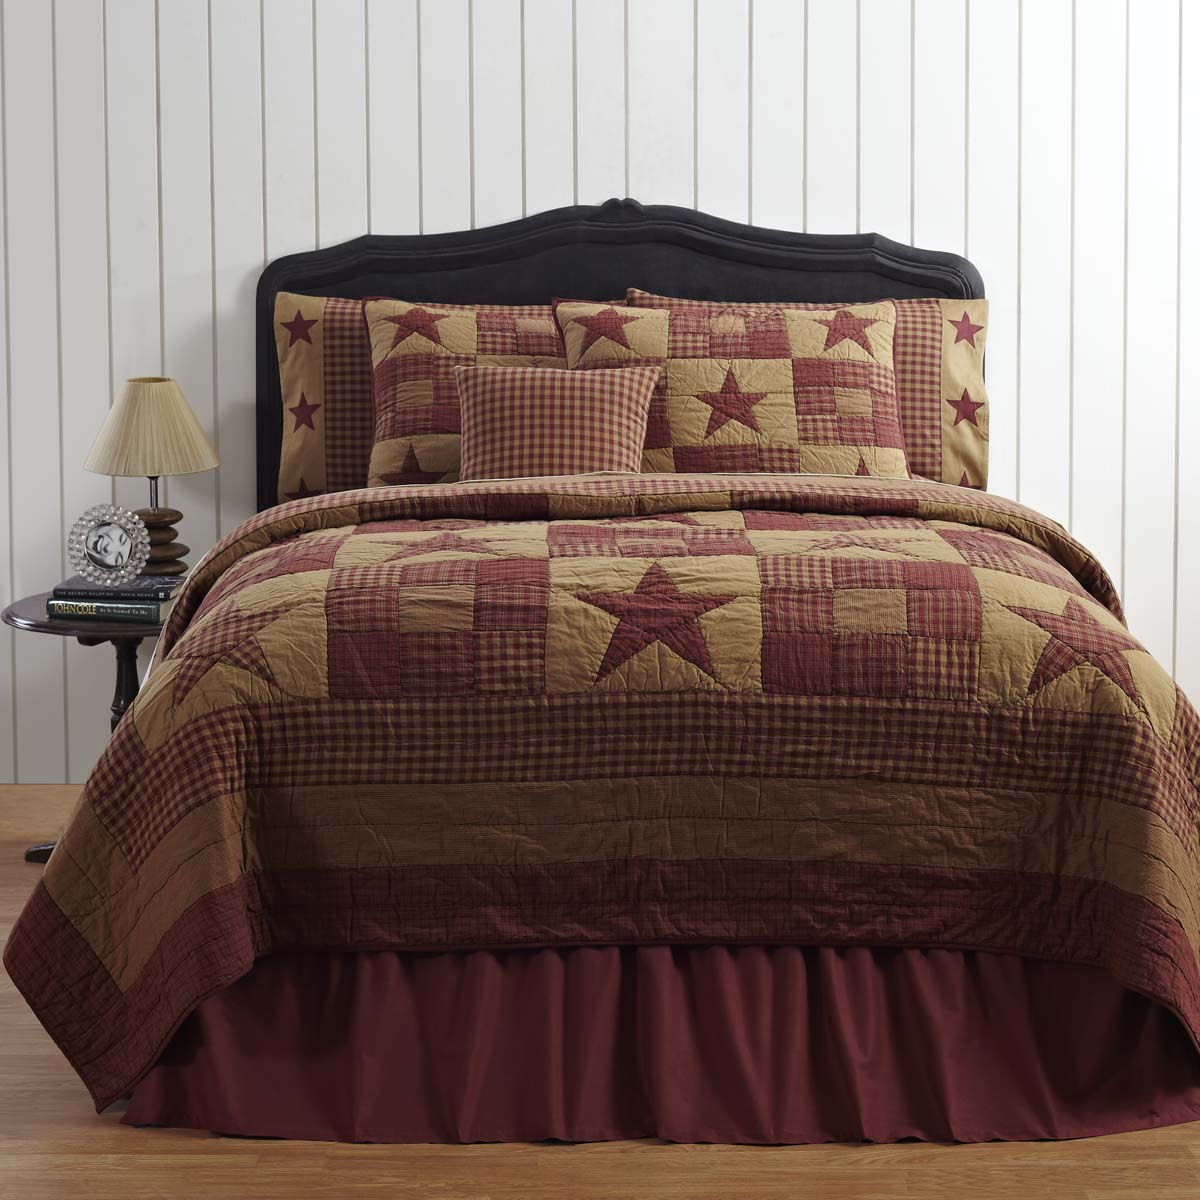 13610-Ninepatch-Star-King-Quilt-105Wx95L-image-5